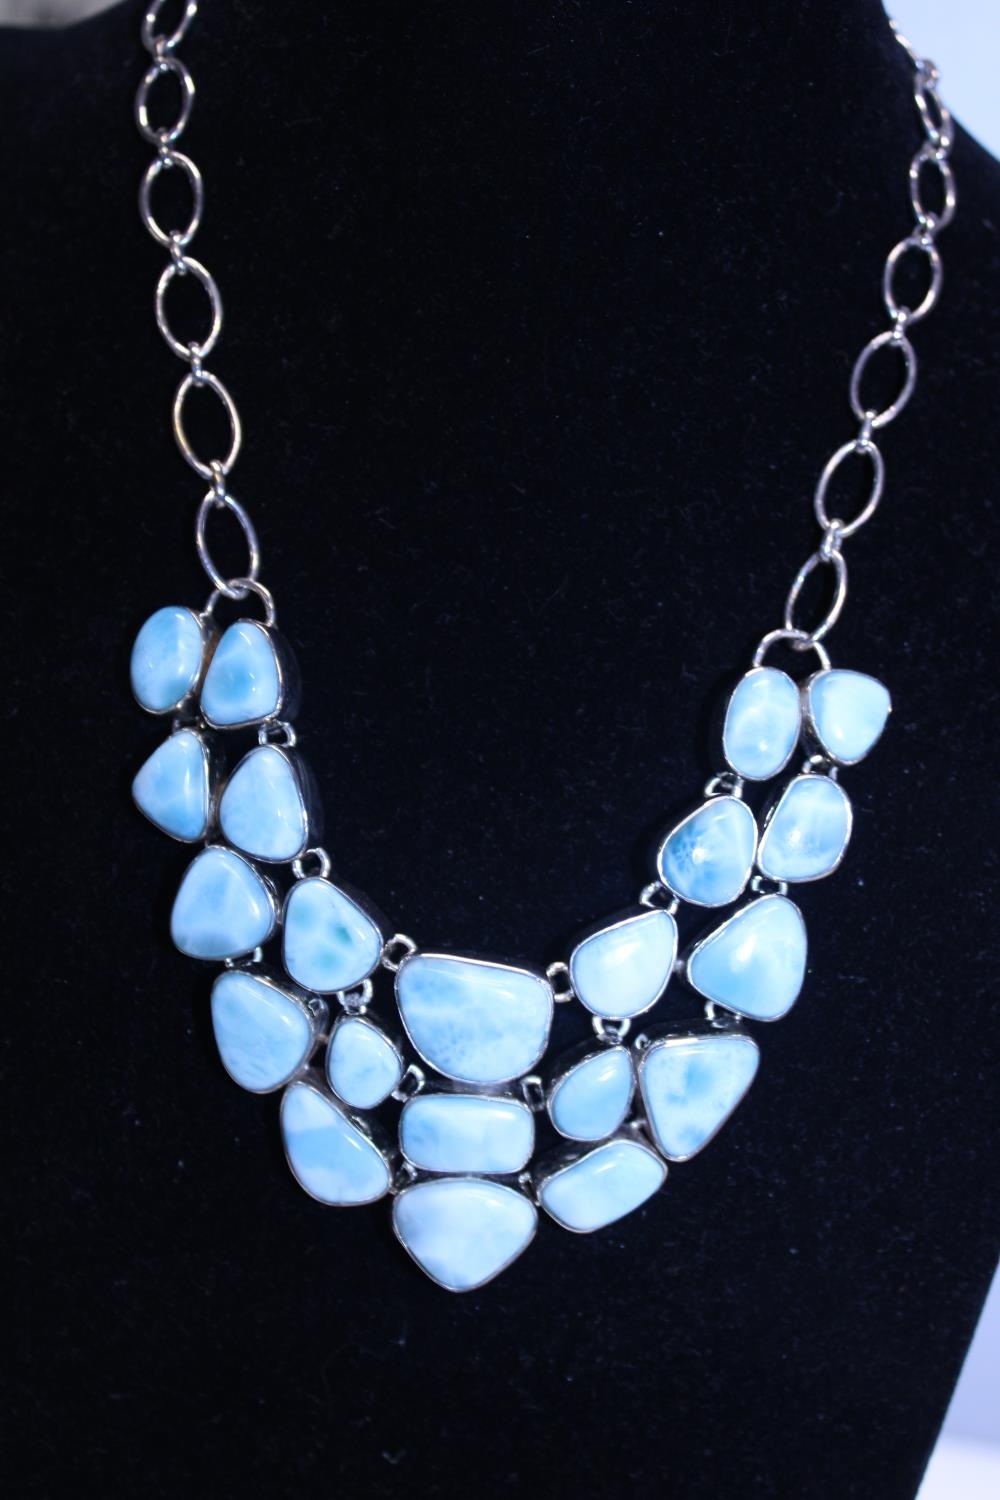 A 925 silver and blue stone necklace